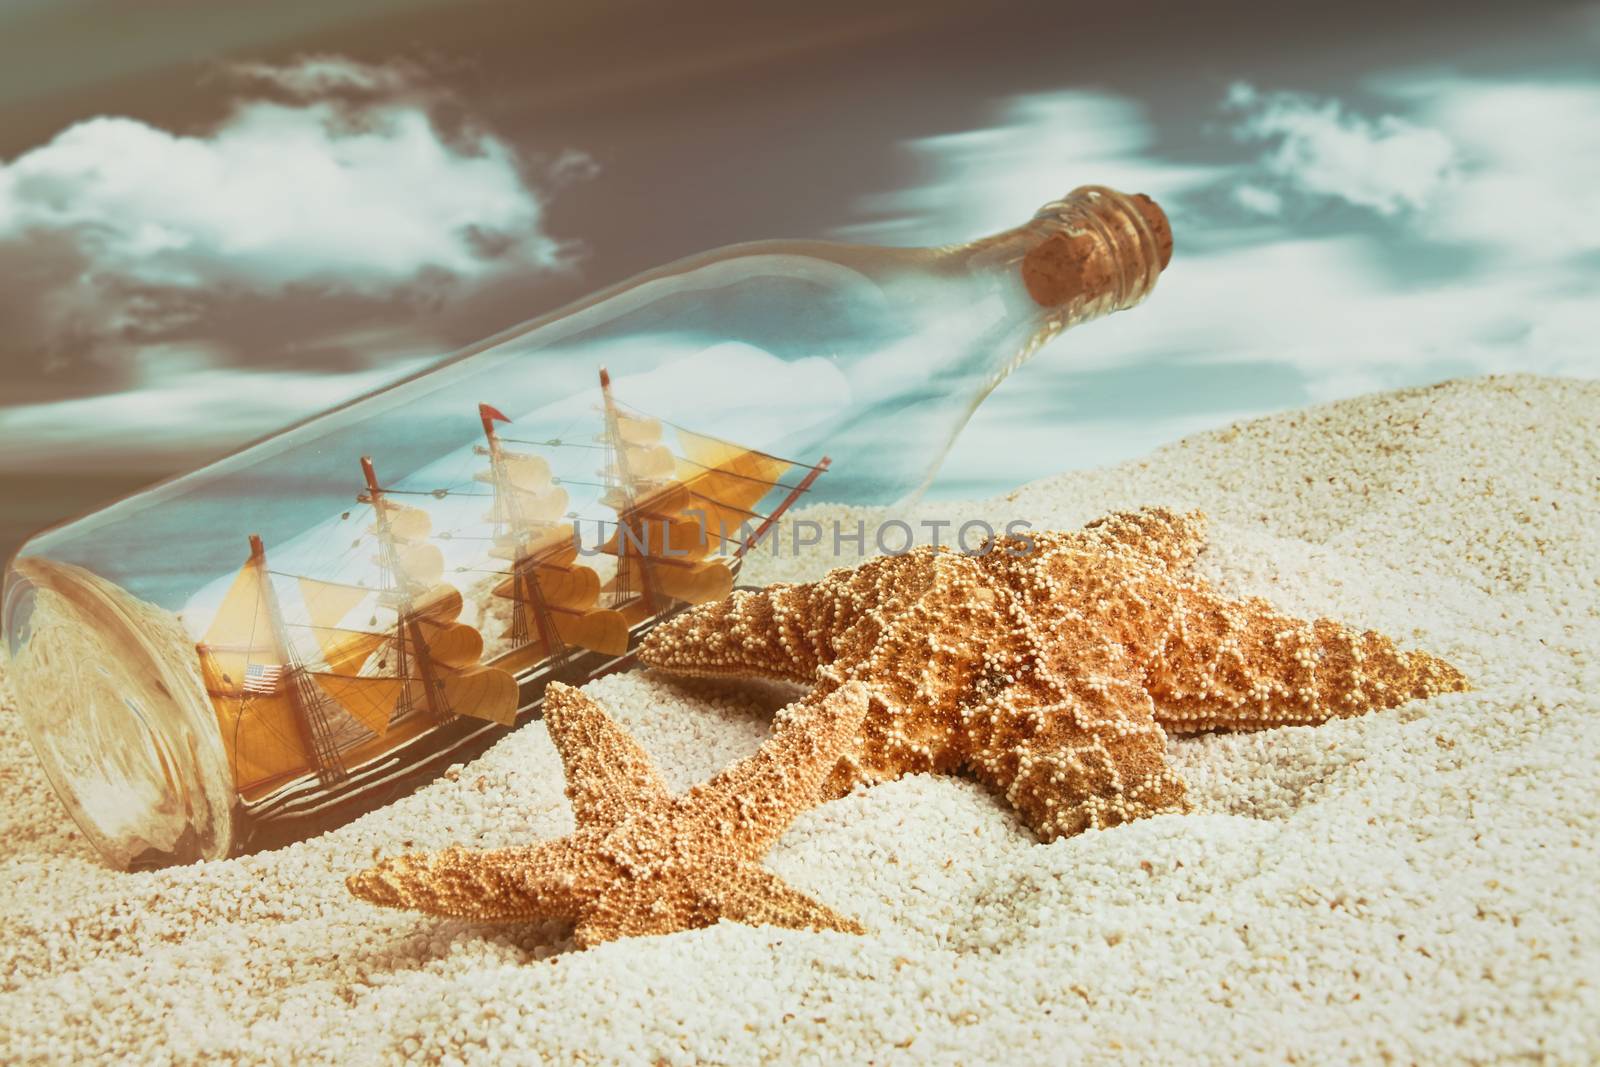 Bottle with ship inside on the beach with starfish